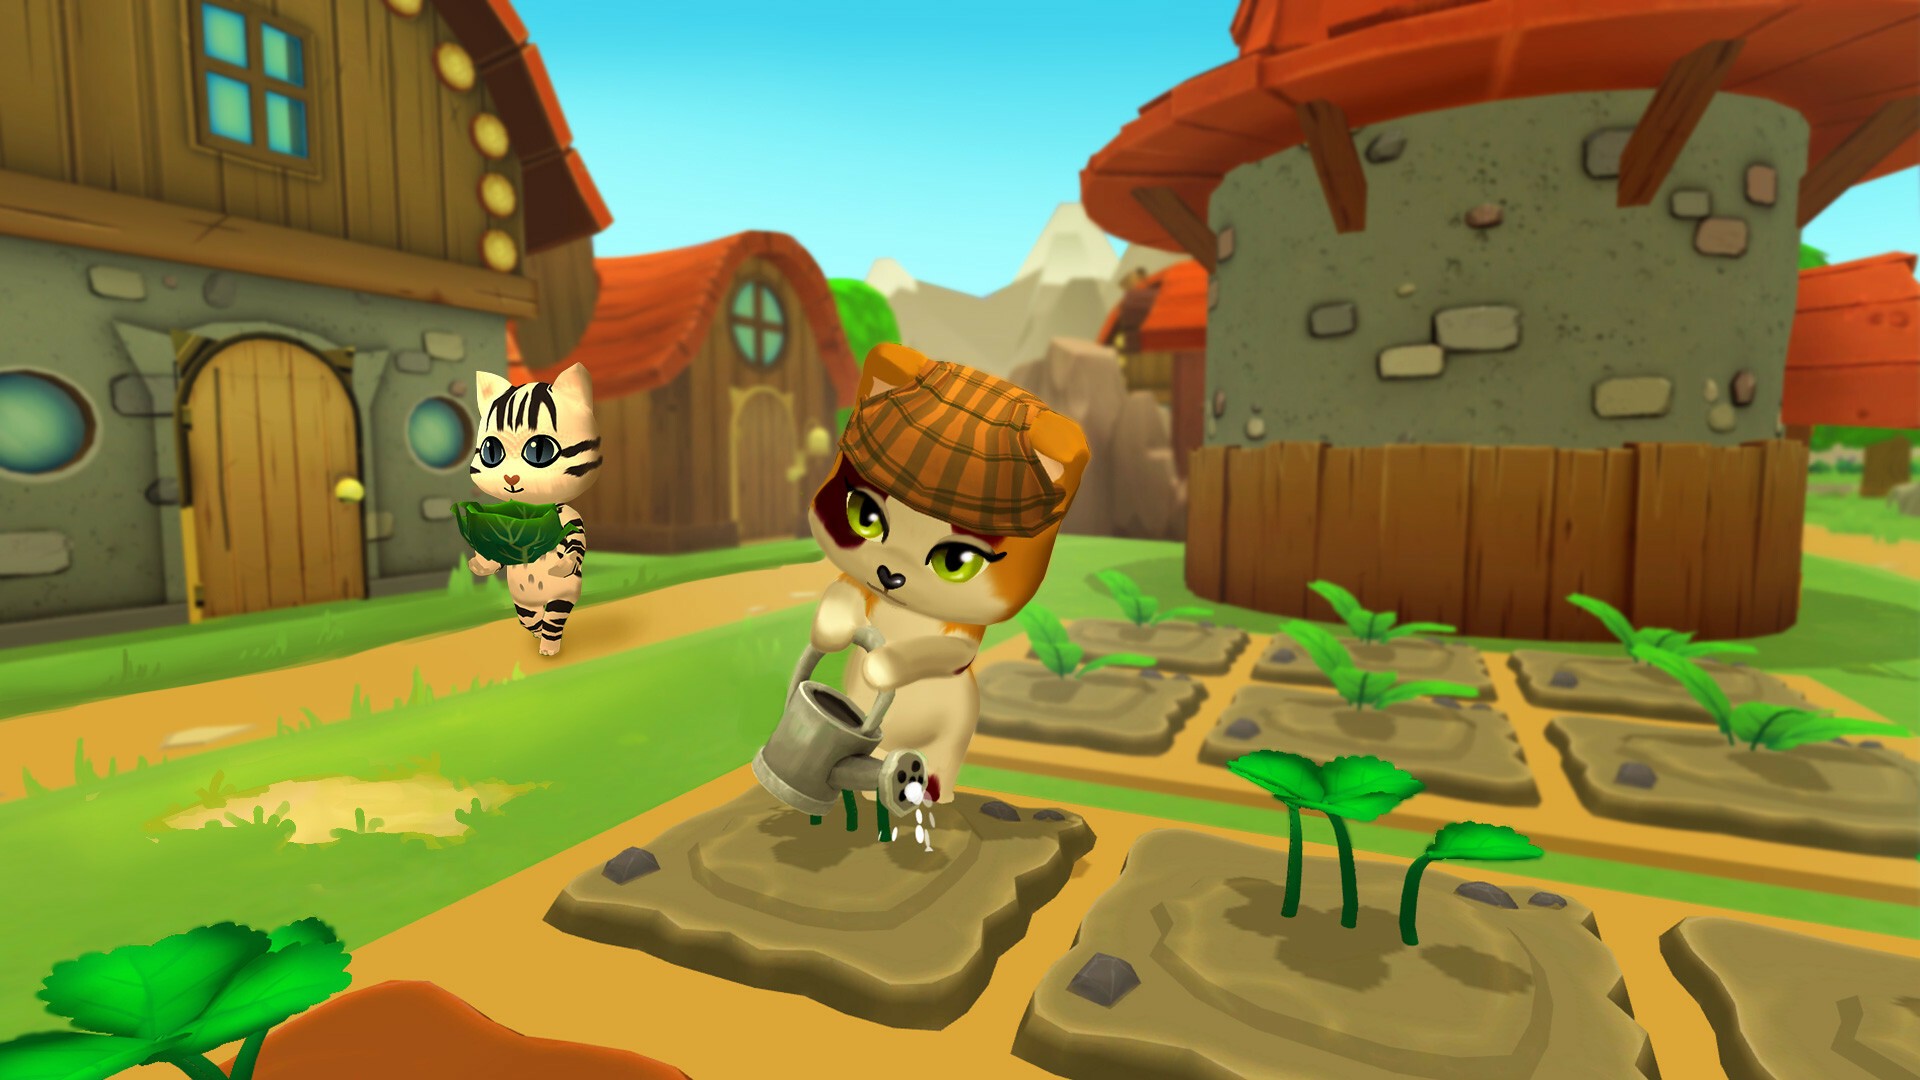 Sims 4 meets Animal Crossing in new management game with cats